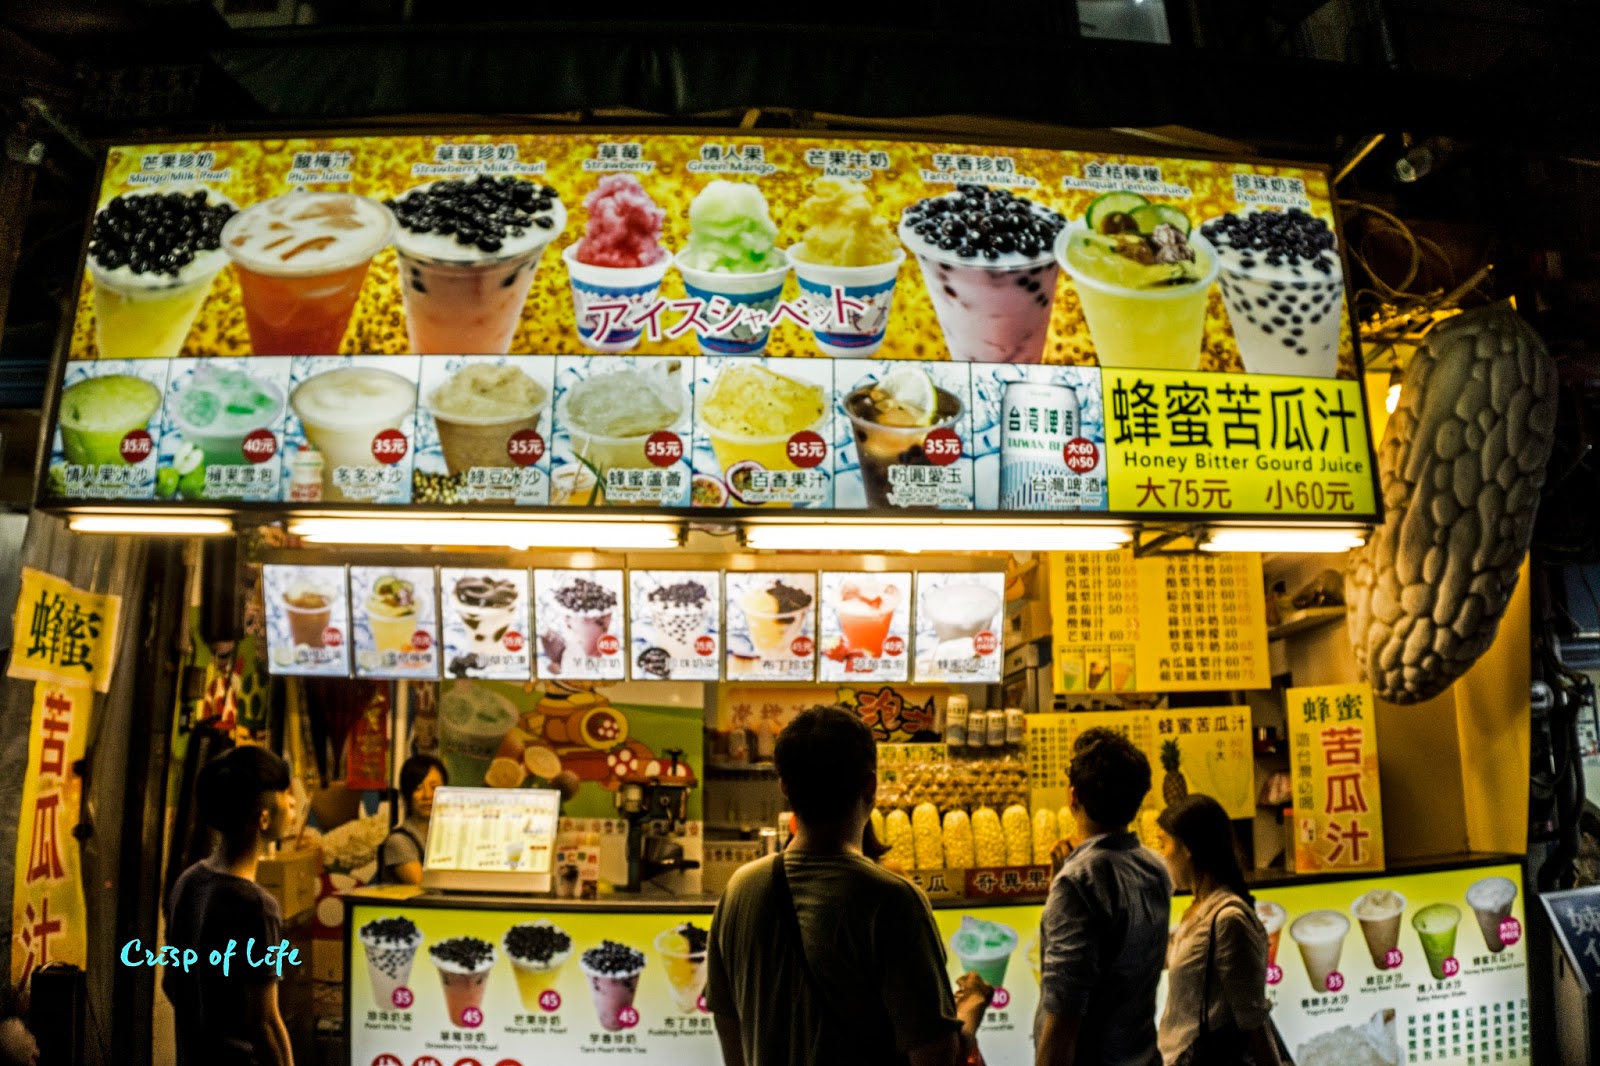 [TAIPEI 台北] Day 2: Shilin night market and Yong He soy drink 士林夜市，永和豆浆